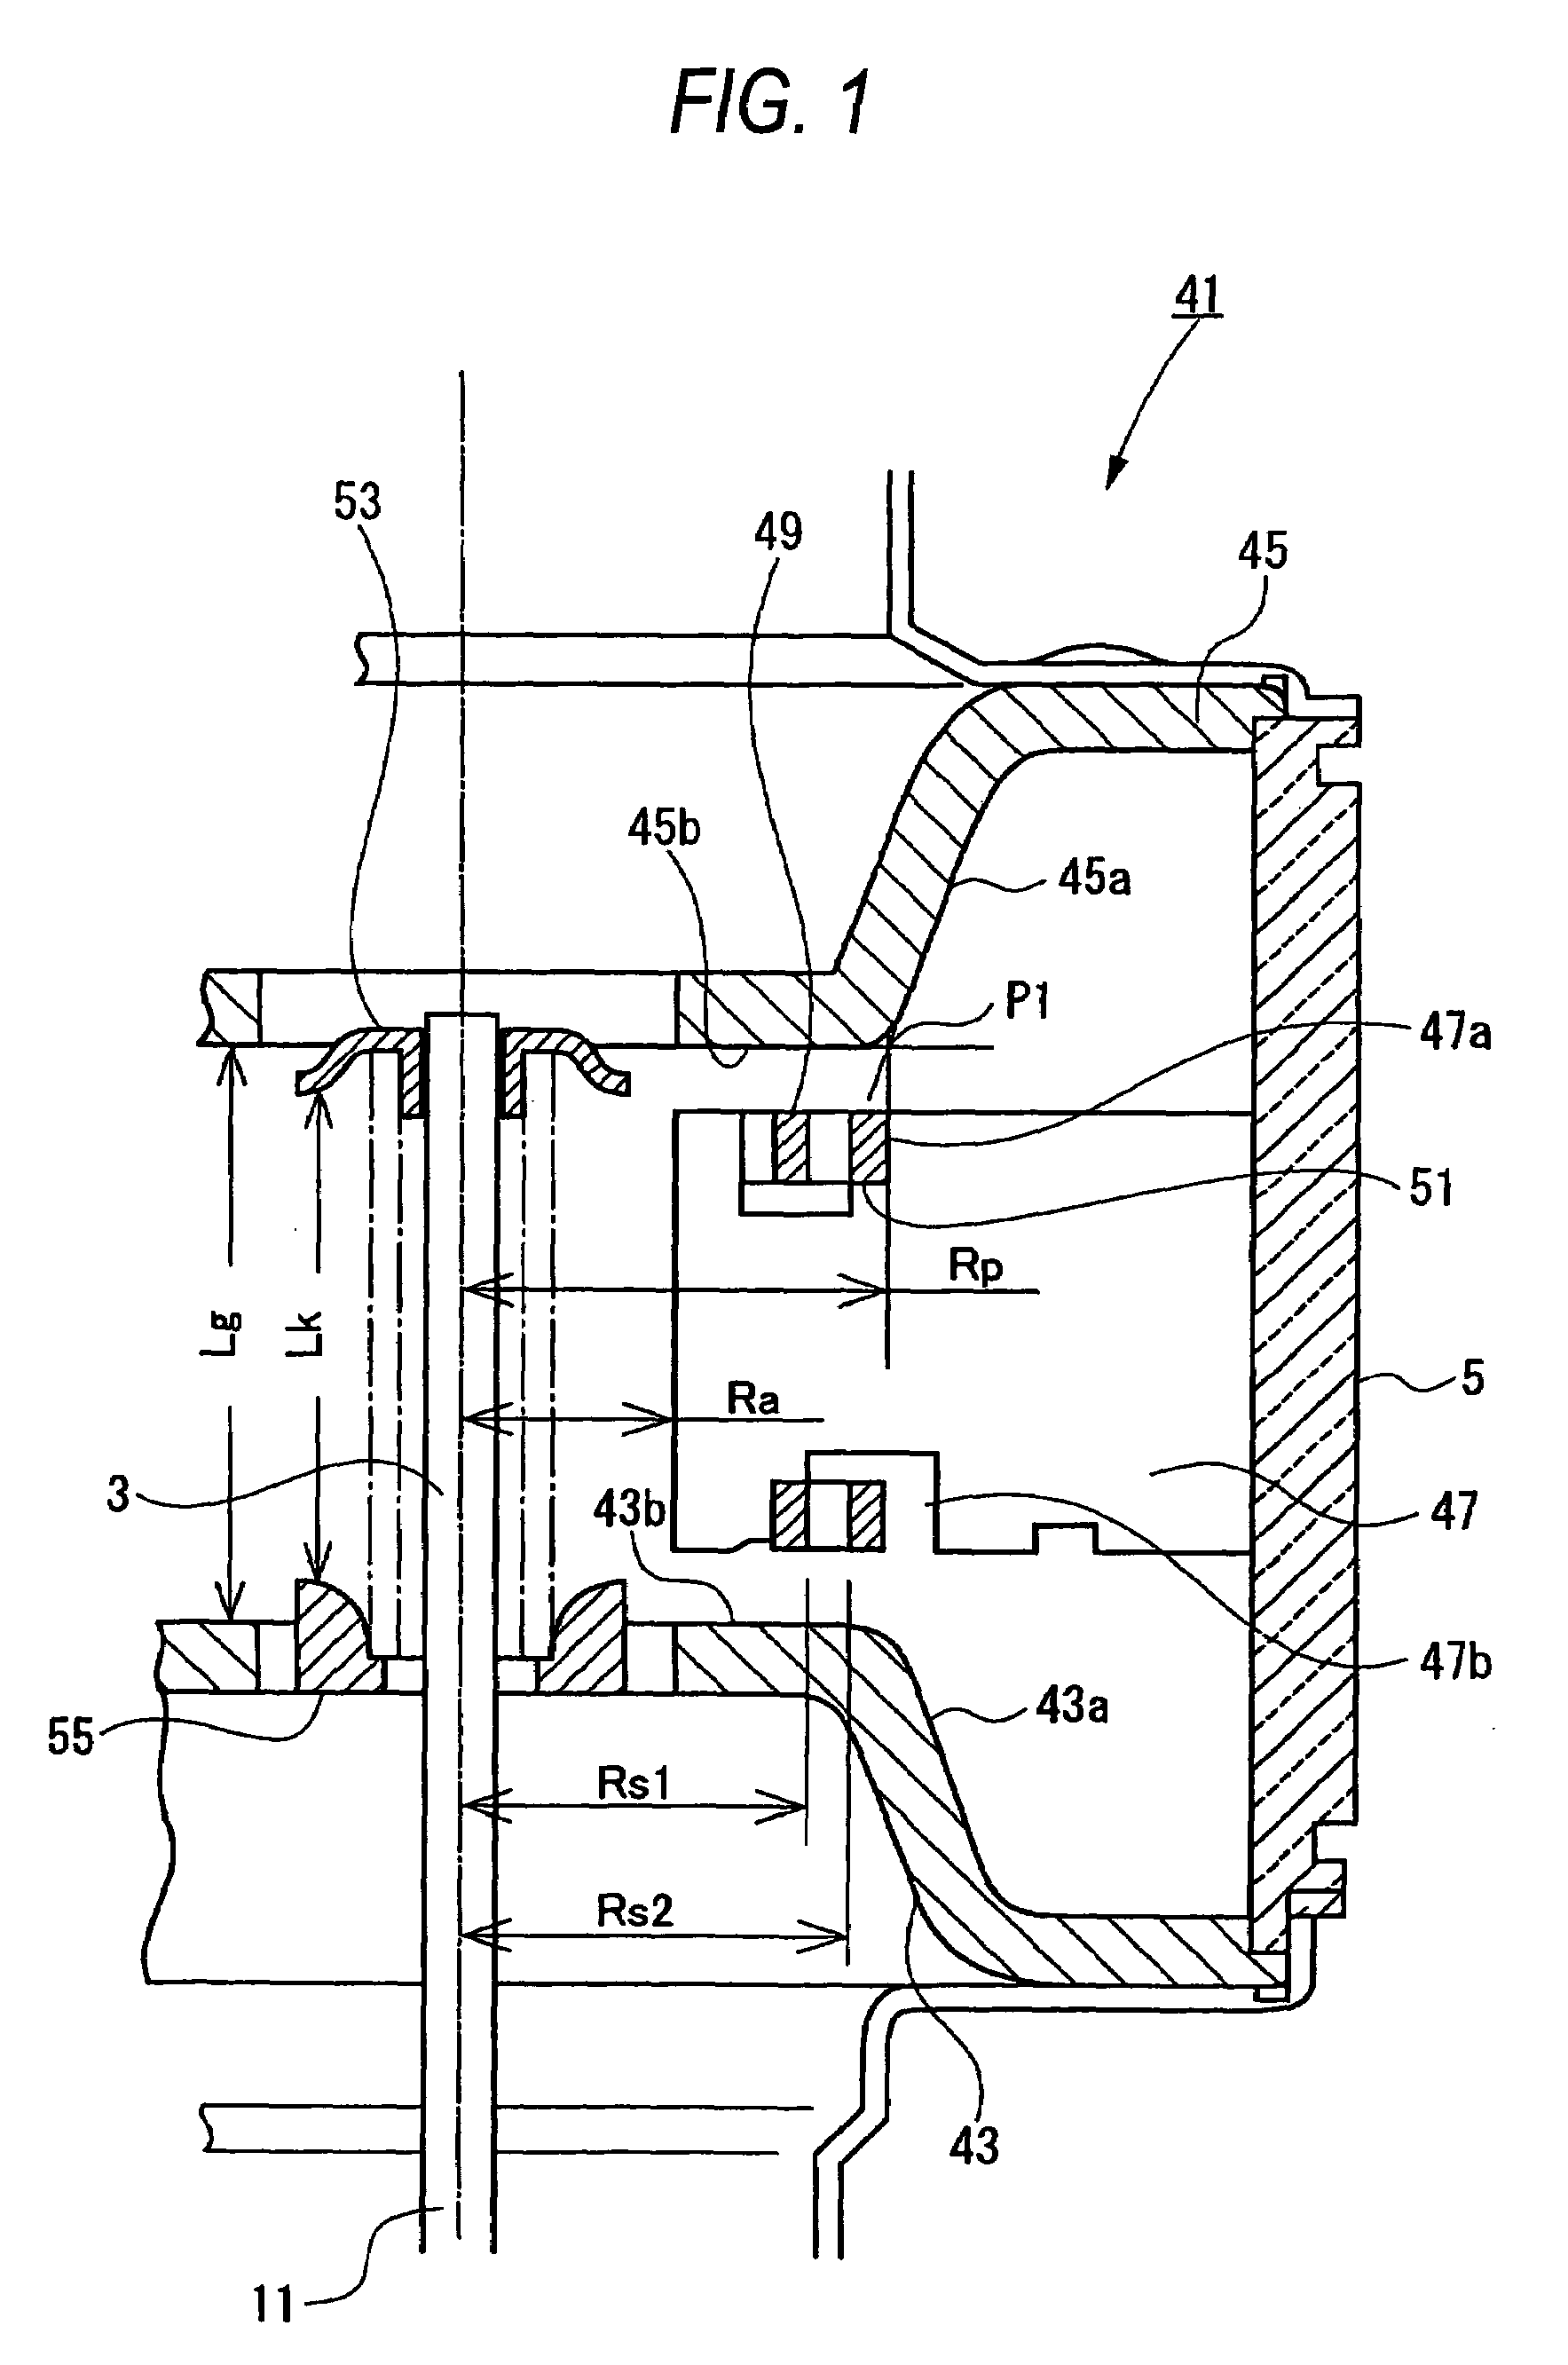 Magnetron with a specific dimension reducing unnecessary radiation